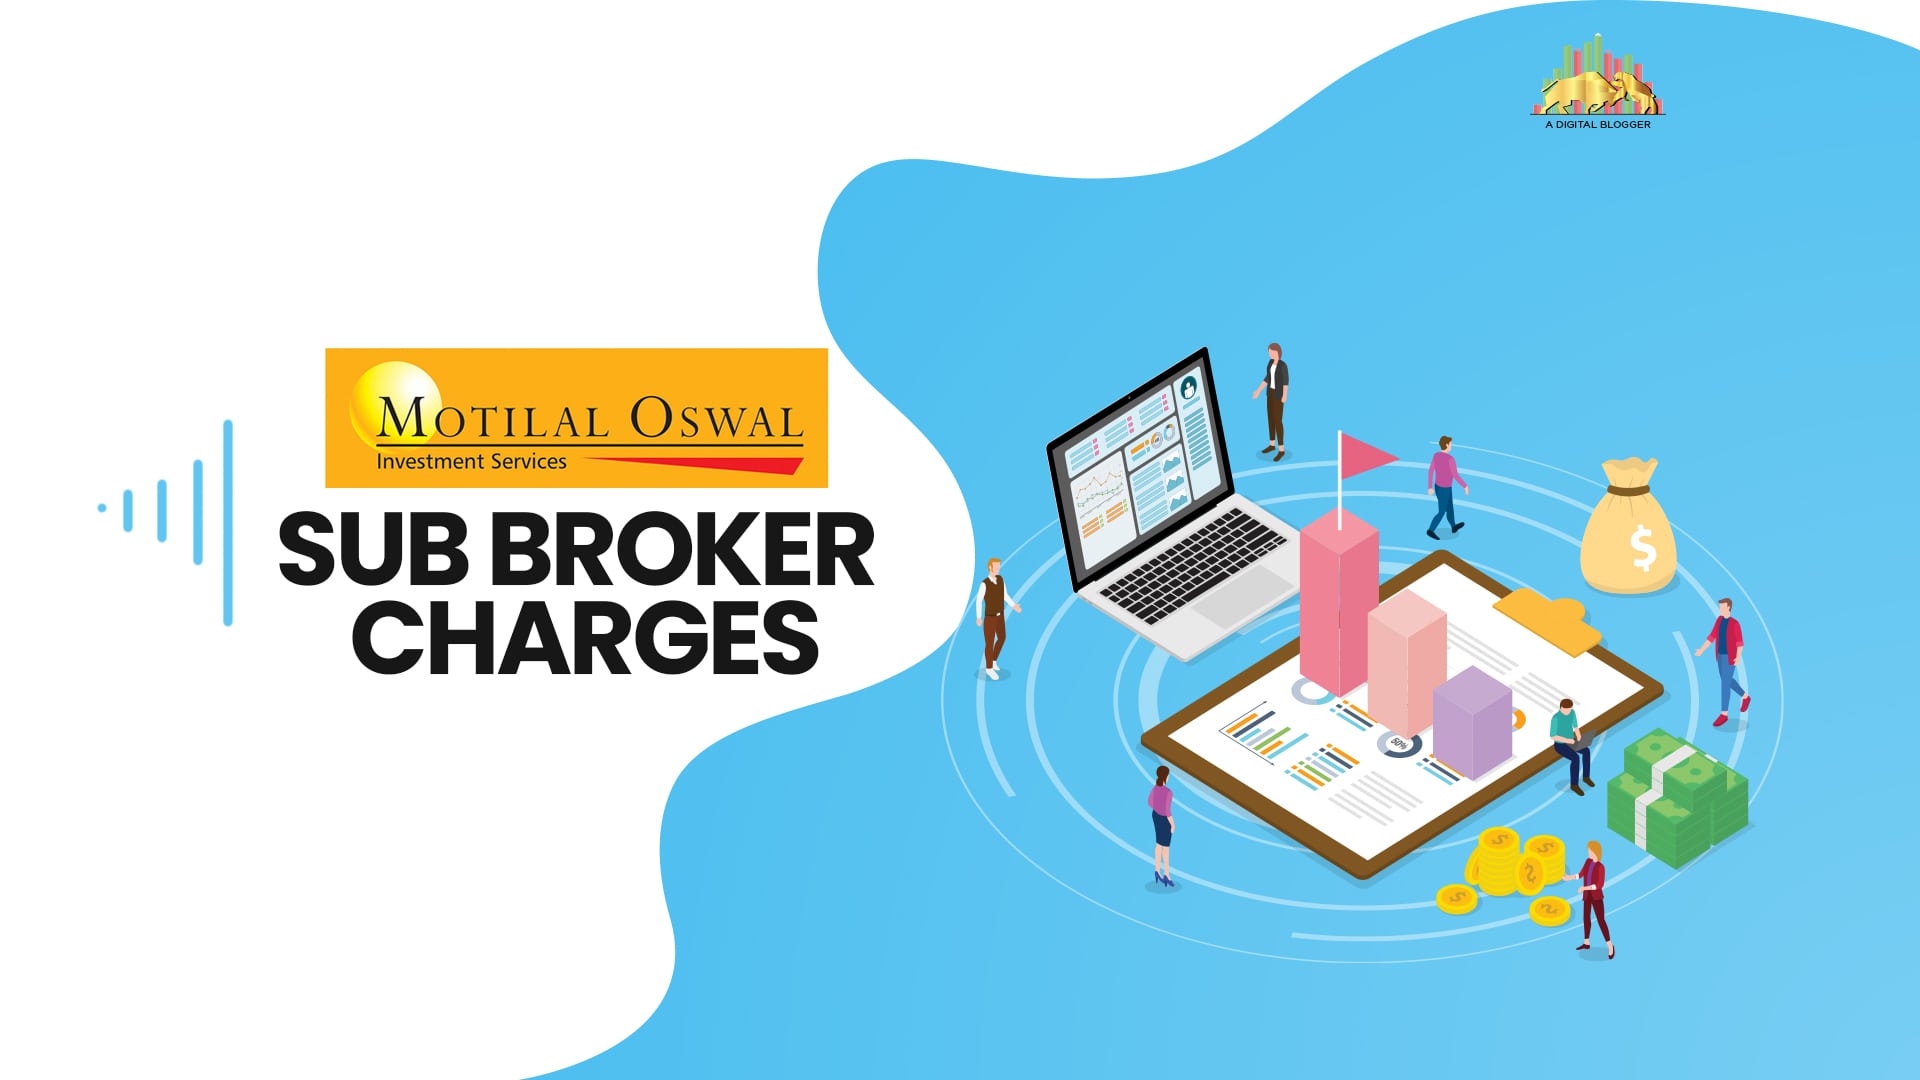 Motilal Oswal Sub Broker Charges